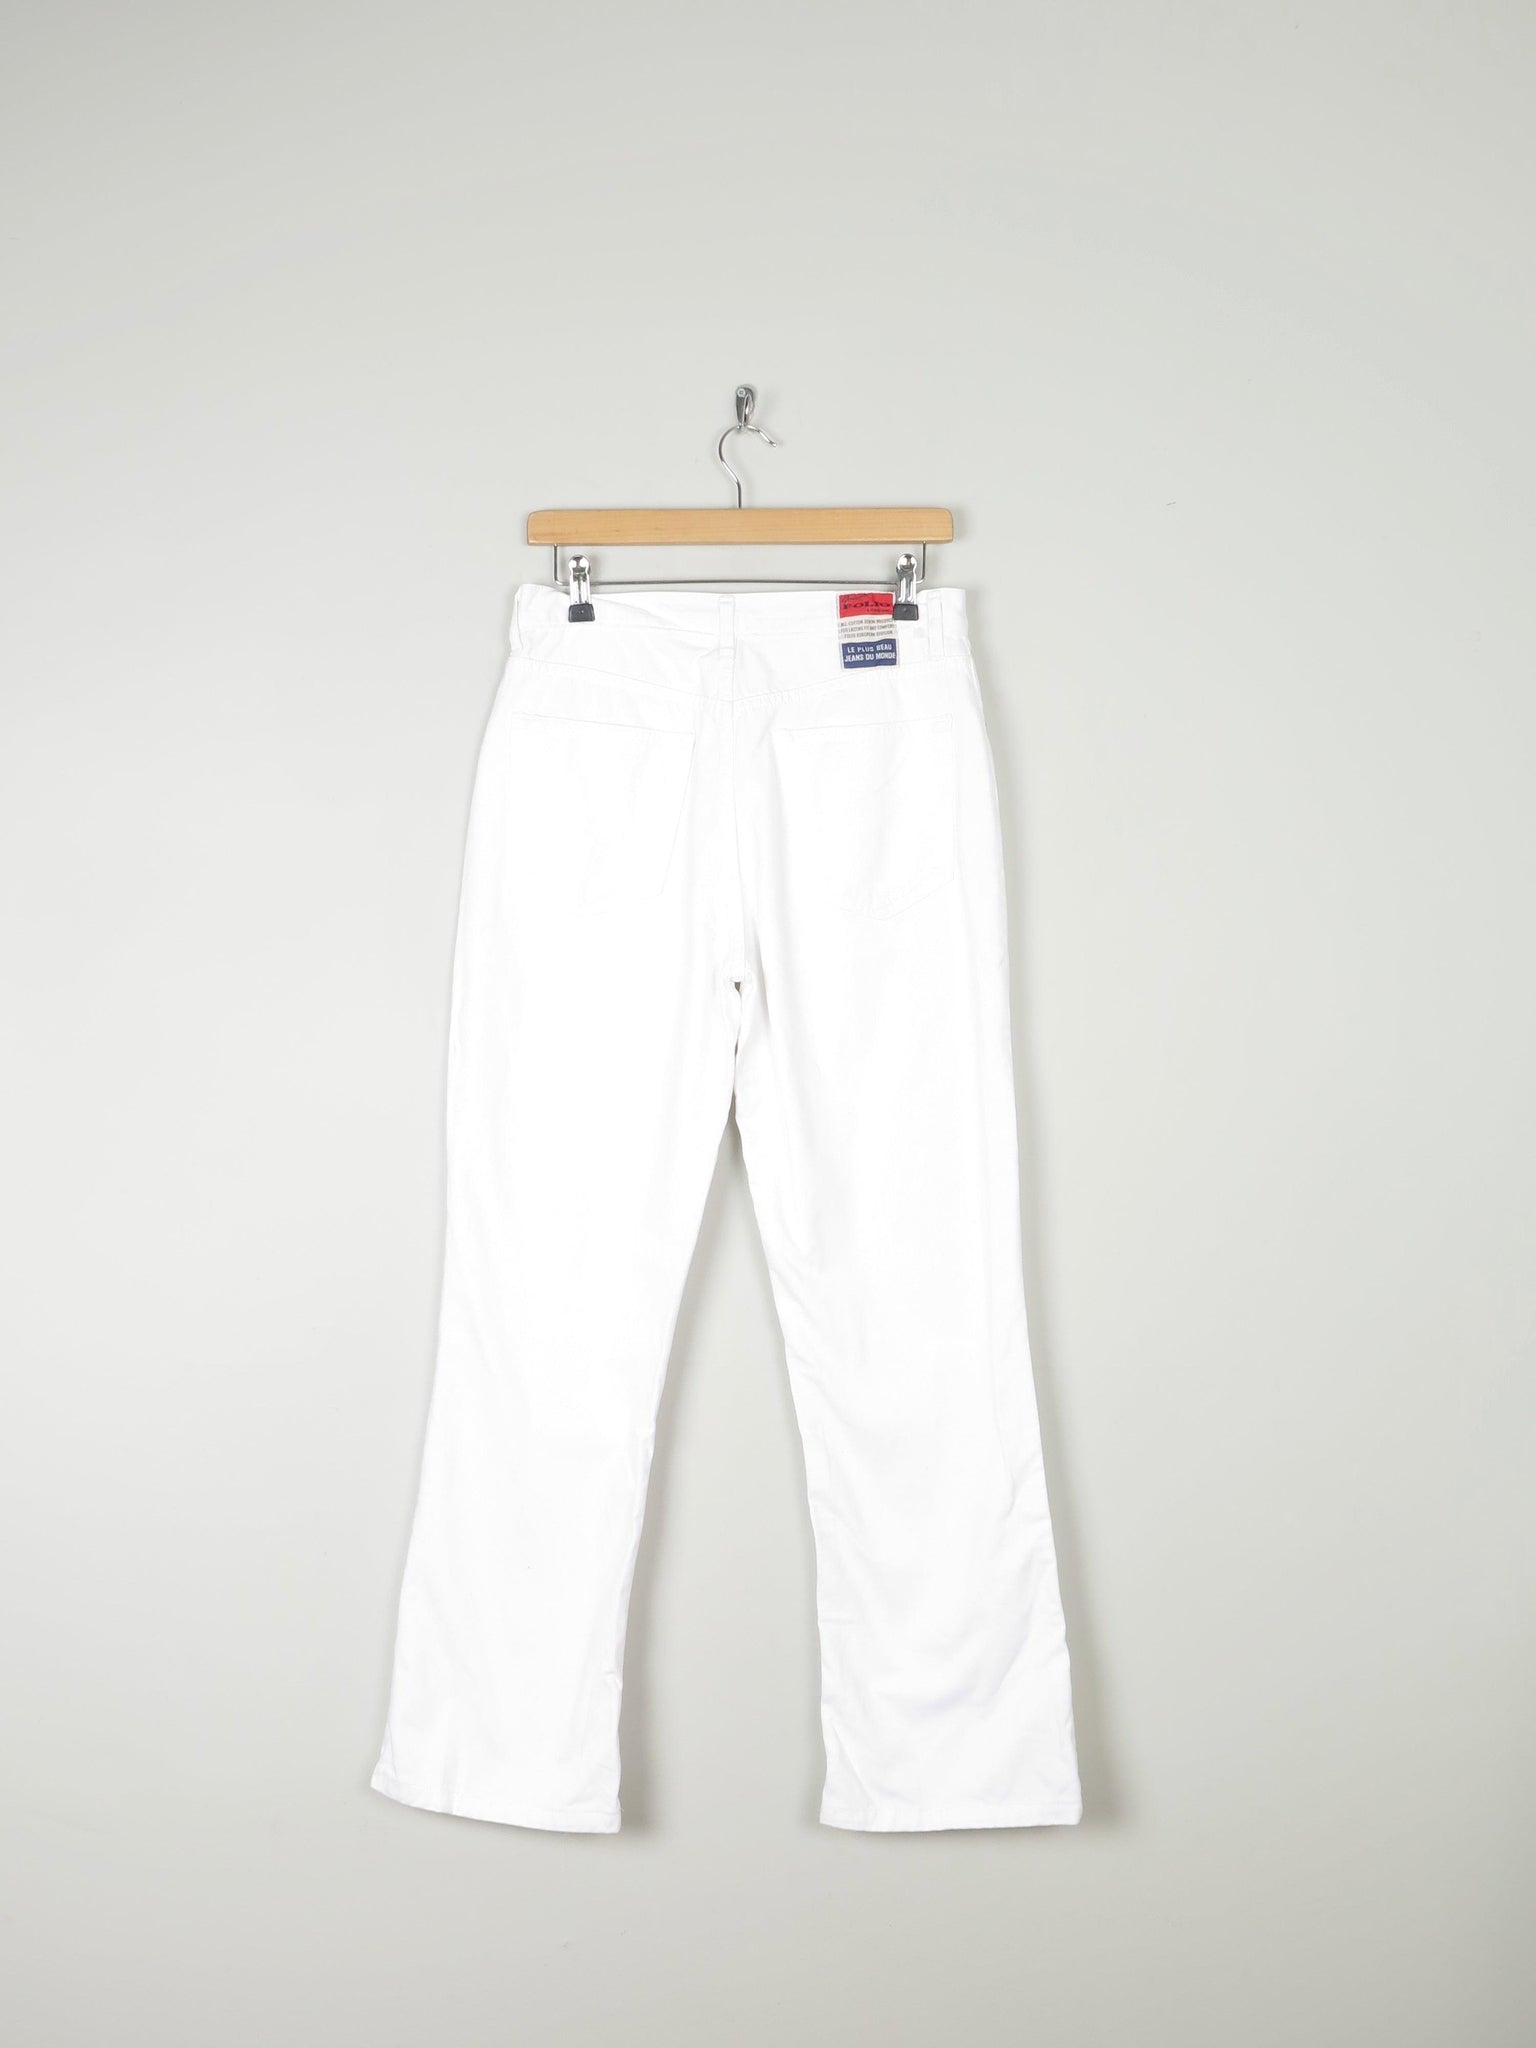 Women's White Vintage Boot Cut Jeans 31"30L 10/12 - The Harlequin